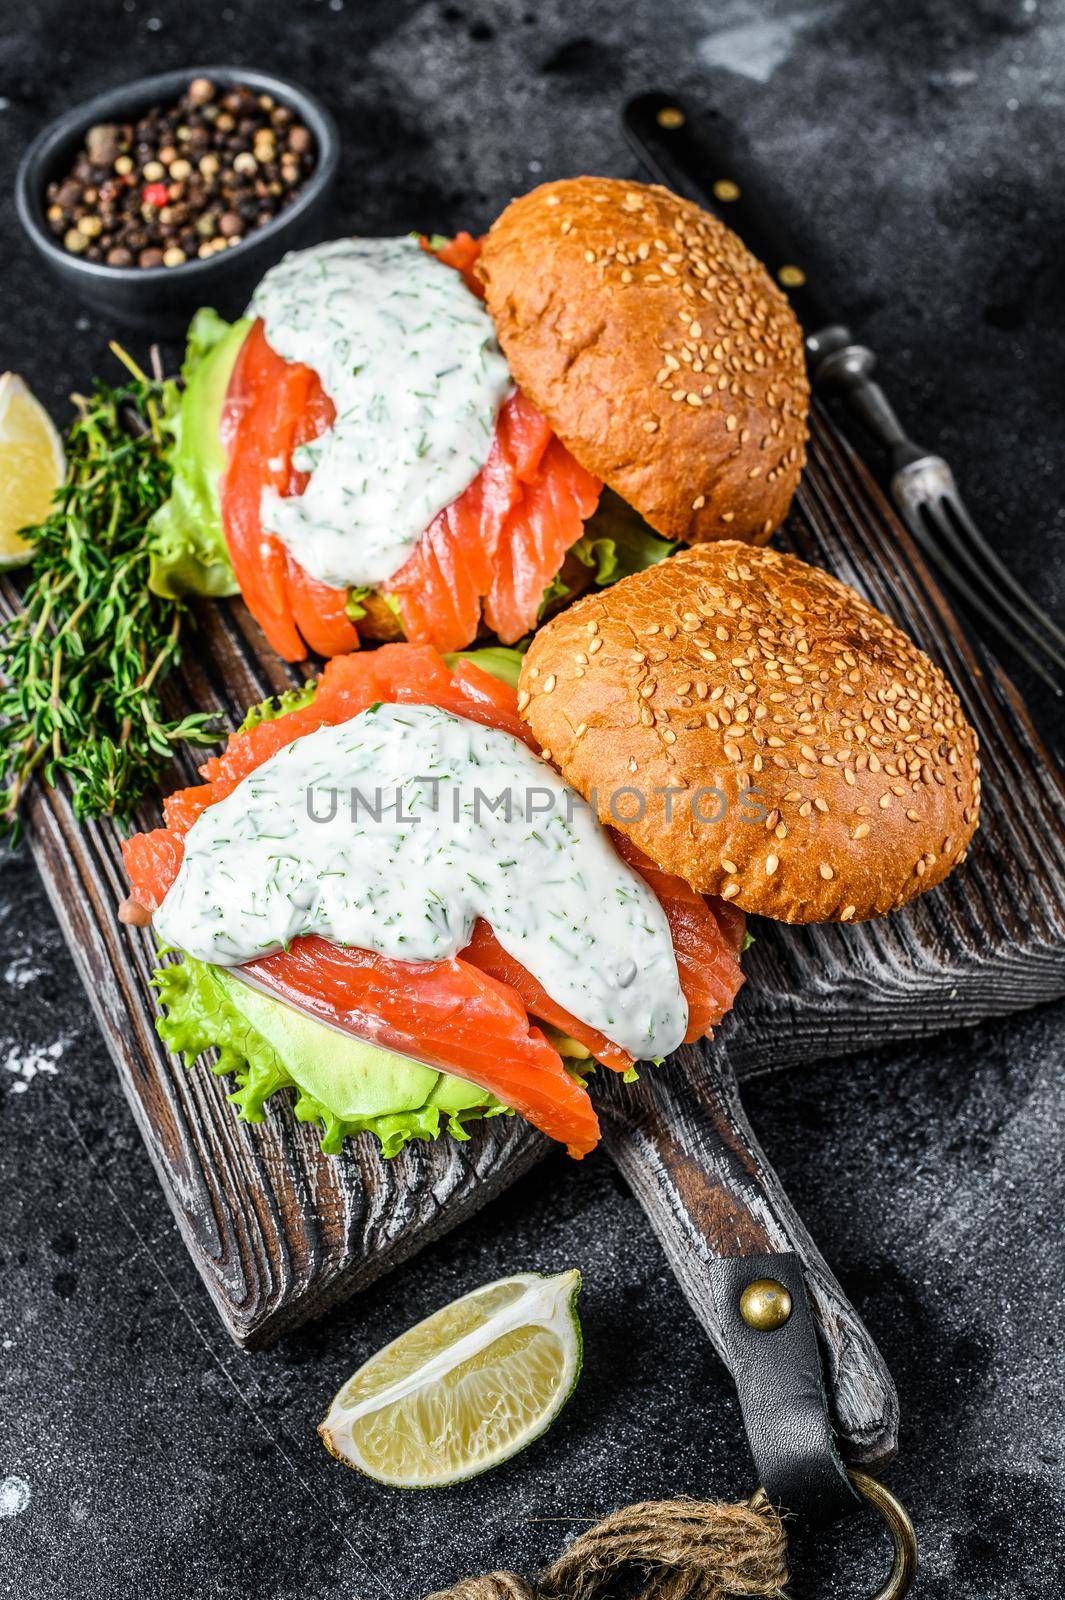 Fish burger with salted salmon, avocado, mustard sauce, cucumber and Iceberg salad. Black background. top view by Composter